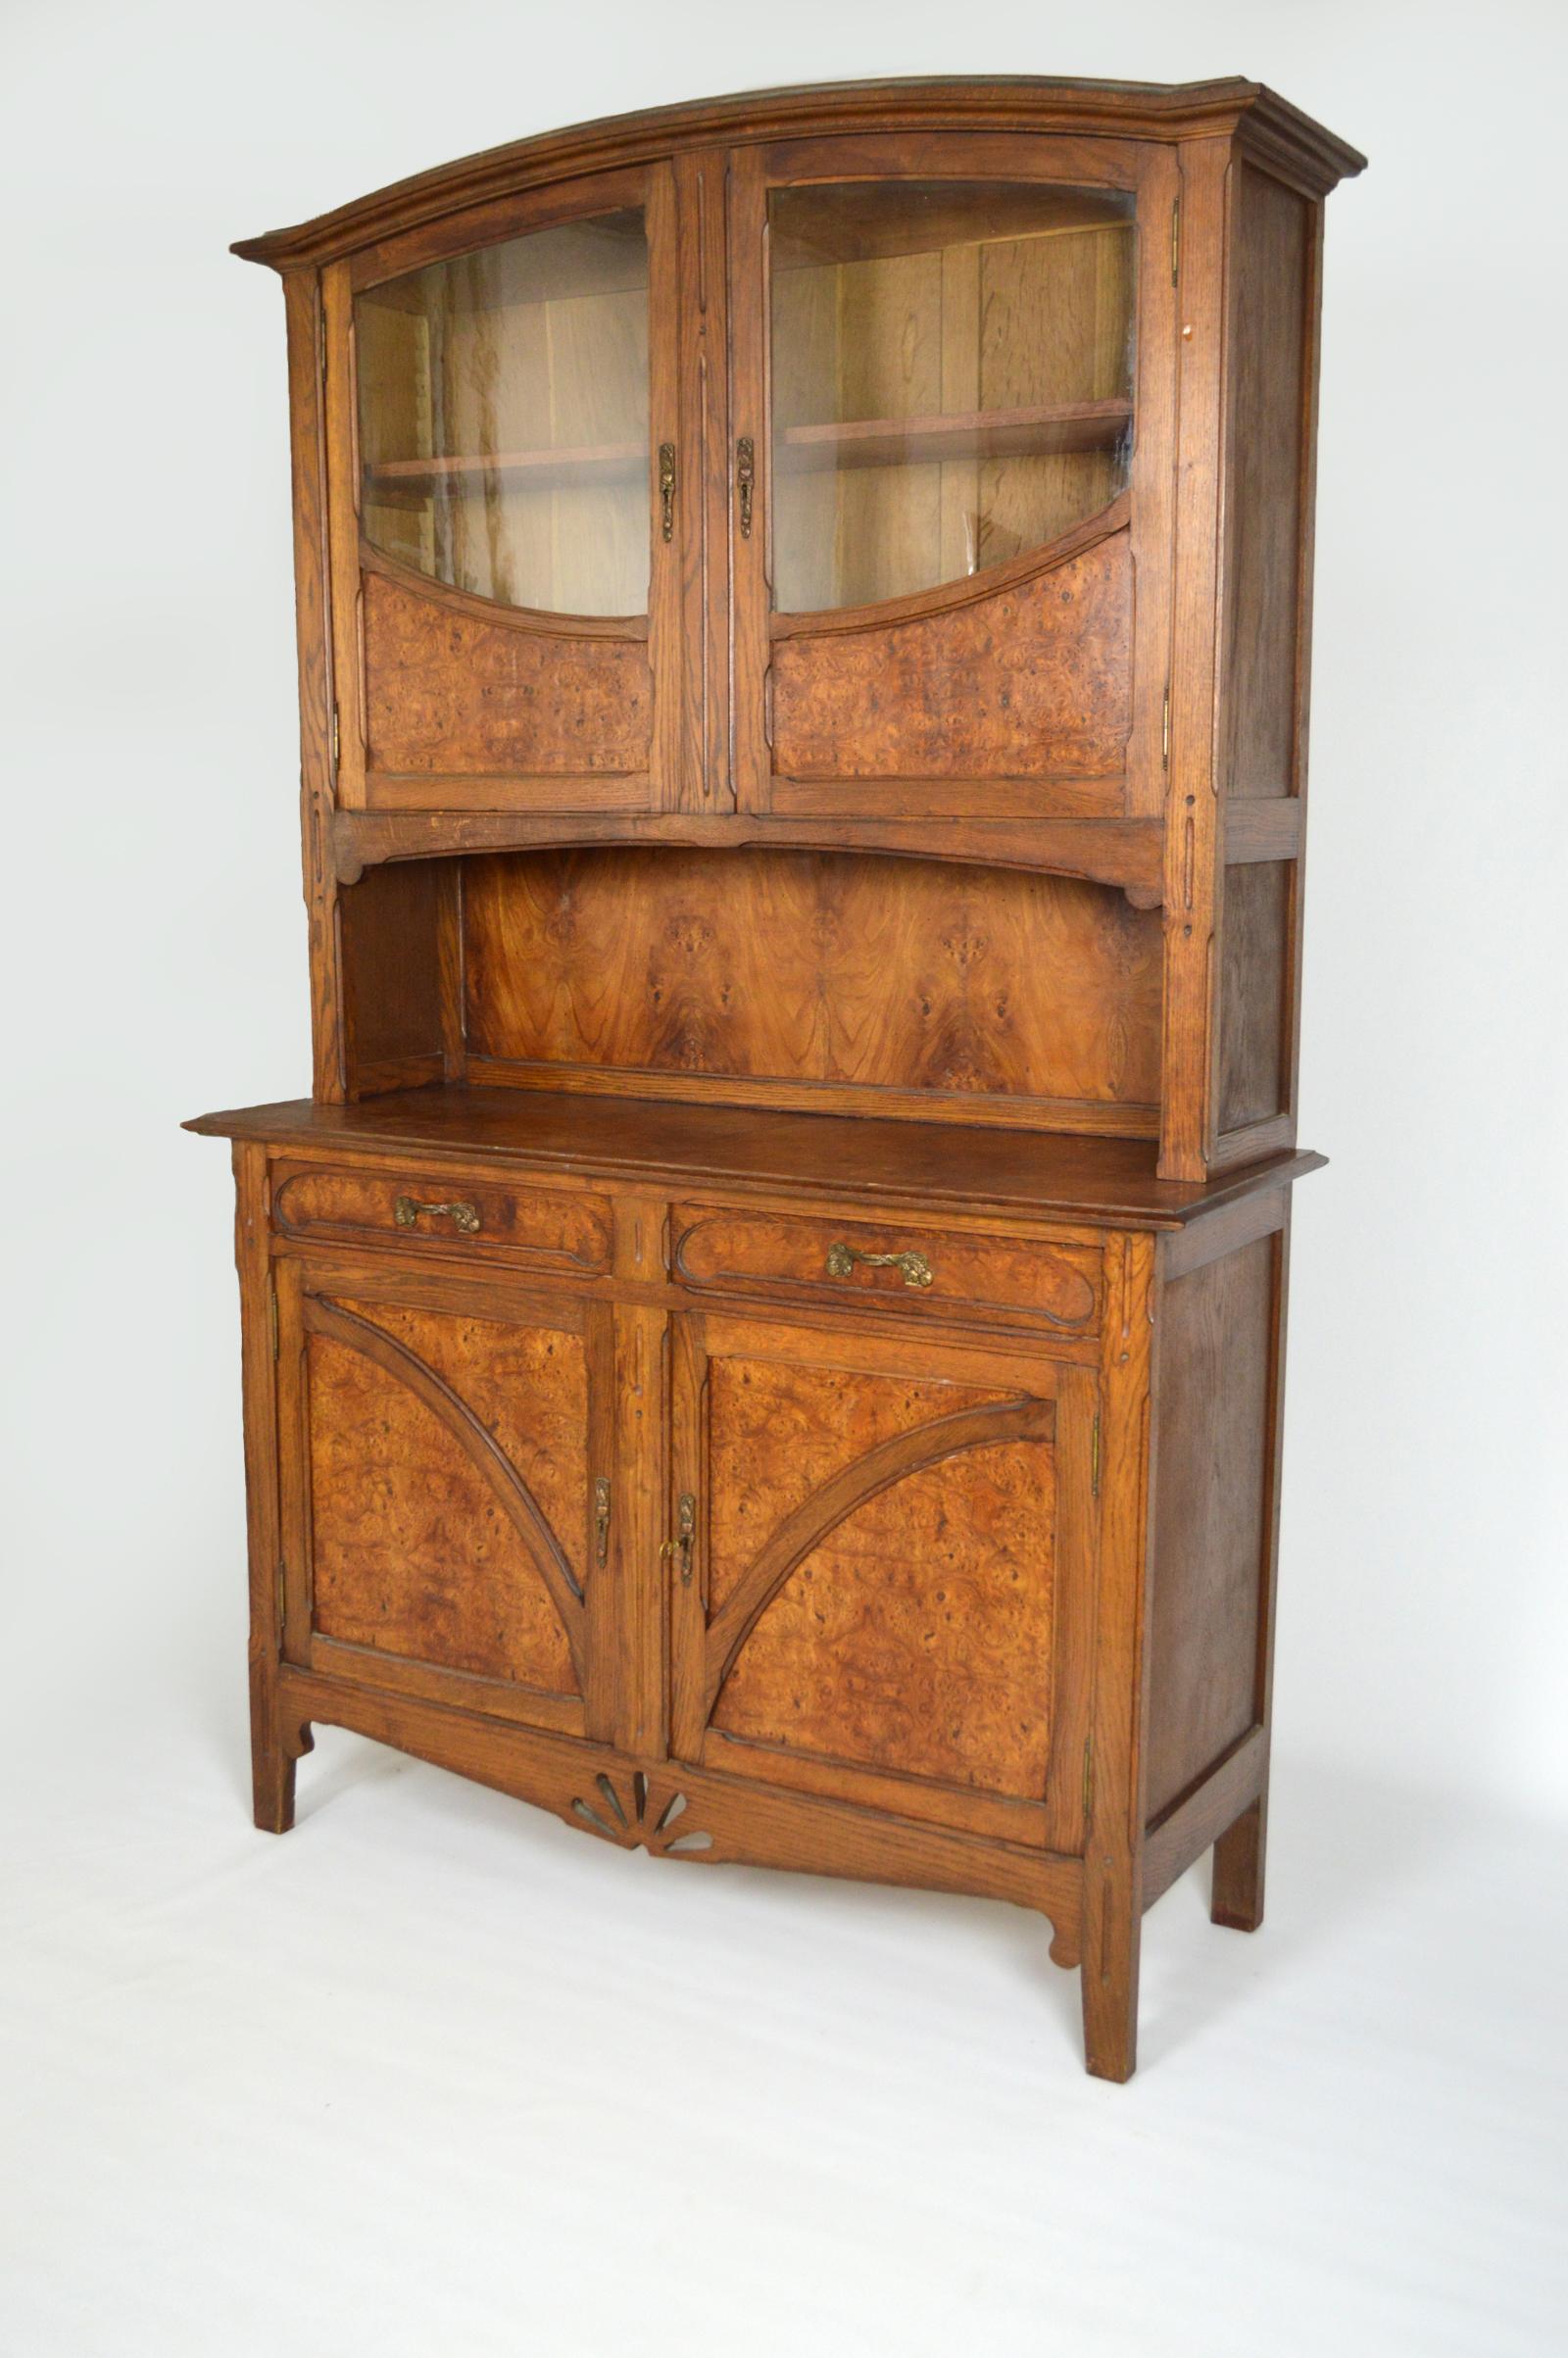 Buffet/cabinet in carved oak and elm burl.
Art Nouveau / Arts & Crafts, France, circa 1910.
In good condition.

The bronzes (entries of locks and handles) are on the theme of the quince / Cydonia (fruits & leaves). 

Two parts buffet:
Lower